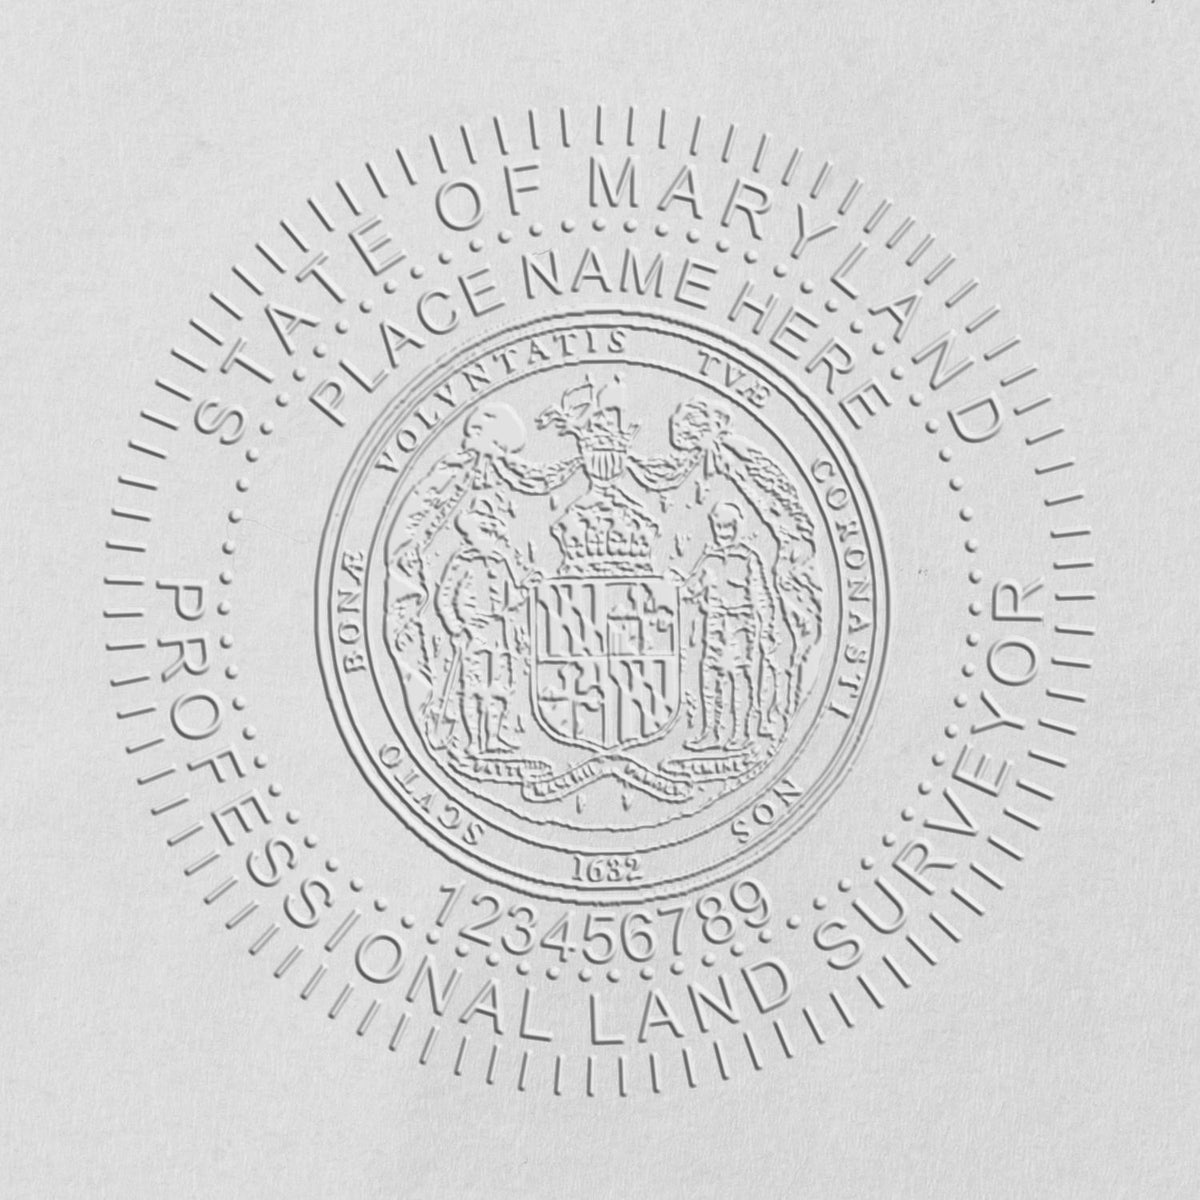 The Long Reach Maryland Land Surveyor Seal stamp impression comes to life with a crisp, detailed photo on paper - showcasing true professional quality.